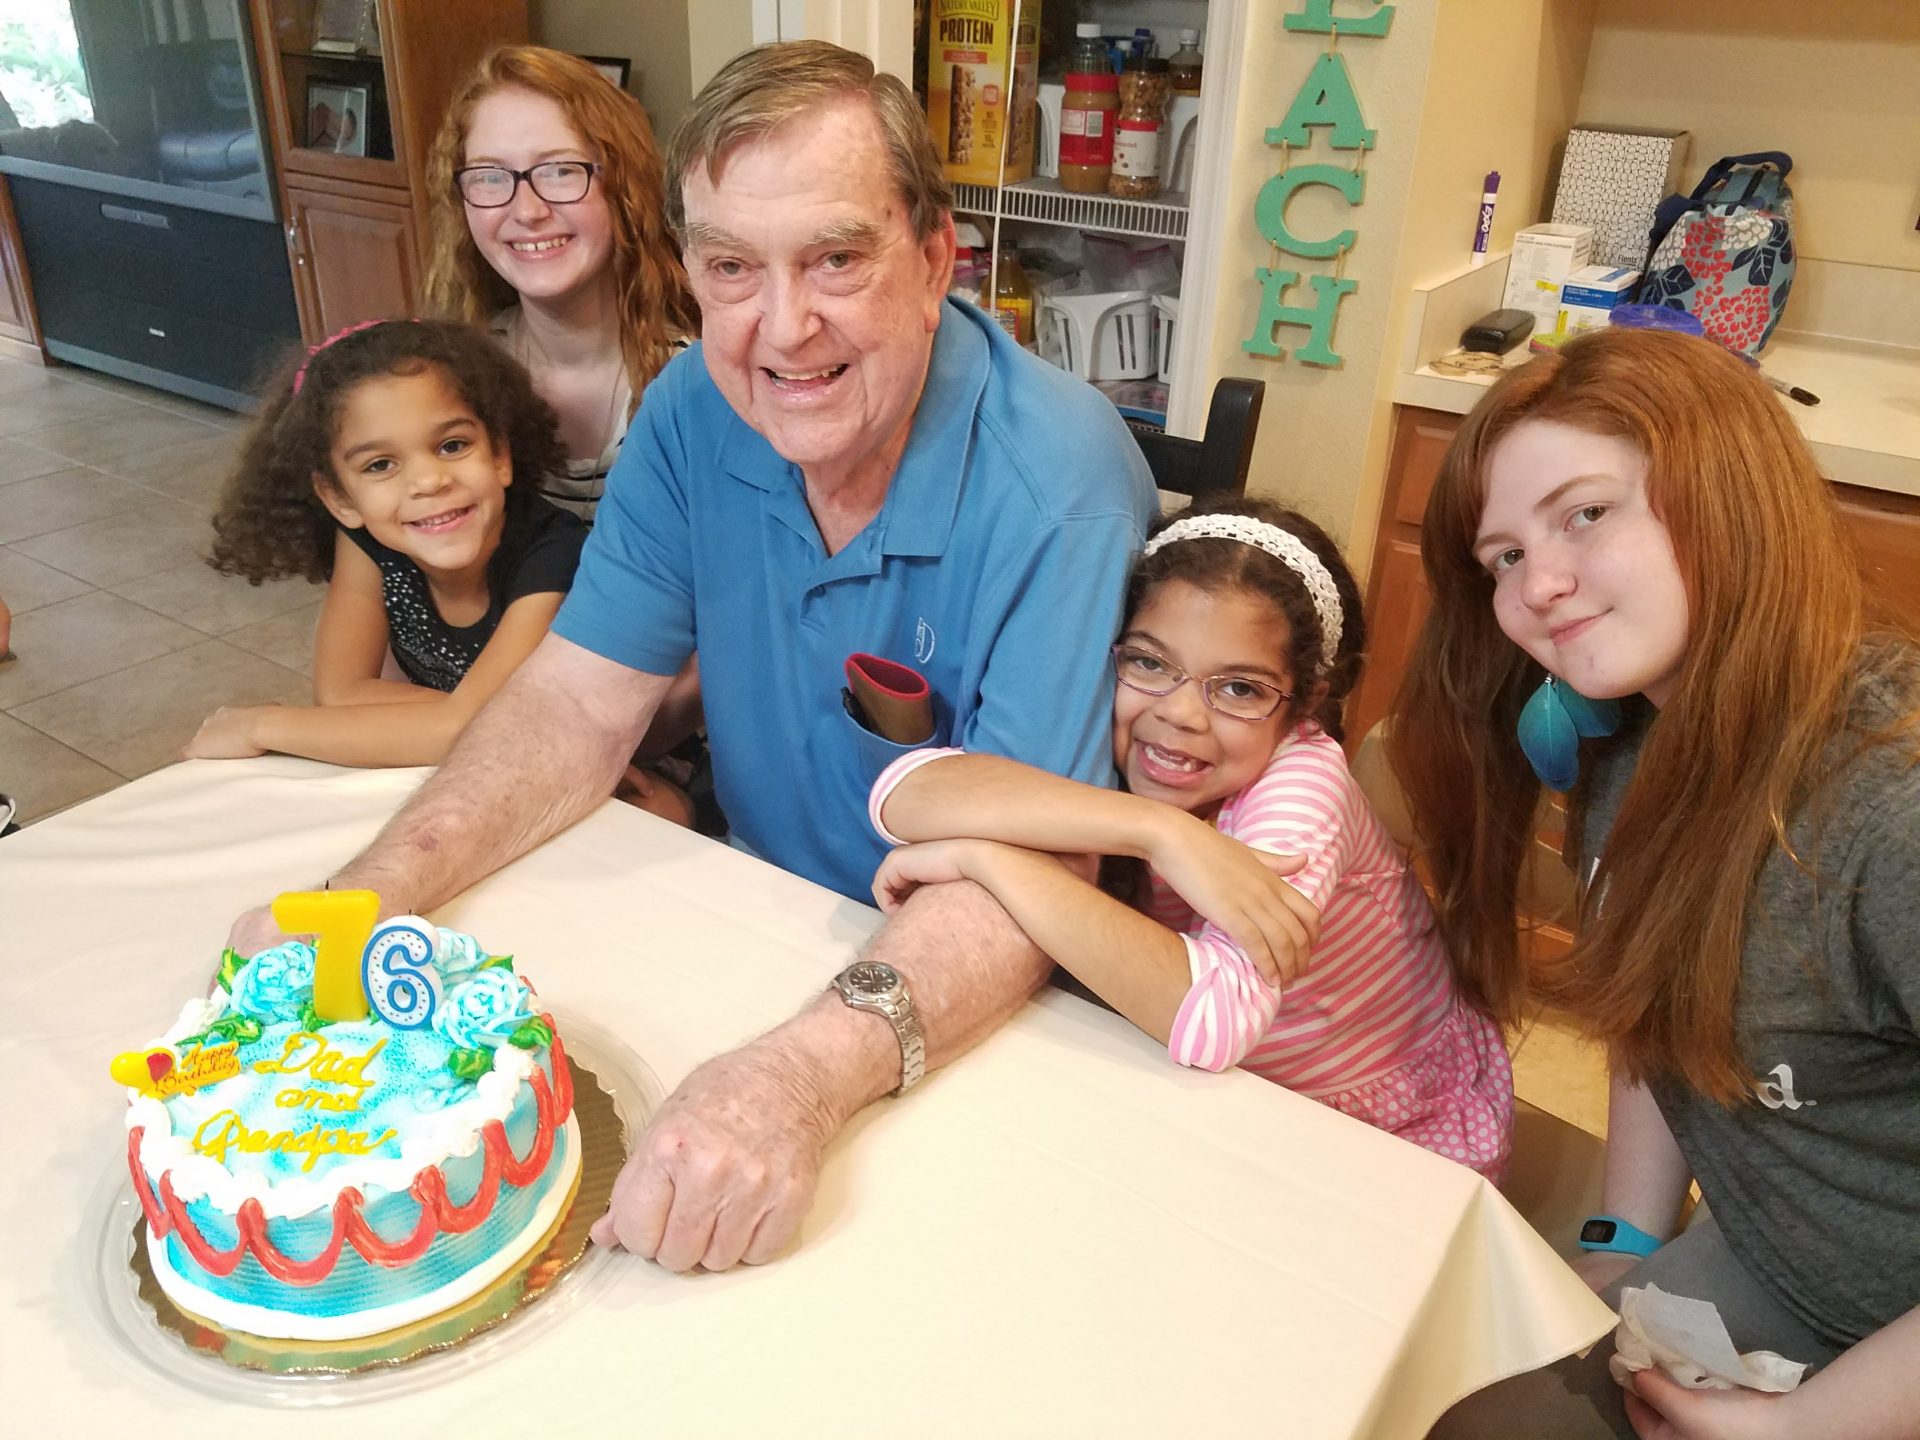 Grandpa's 76th Birthday with granddaughters